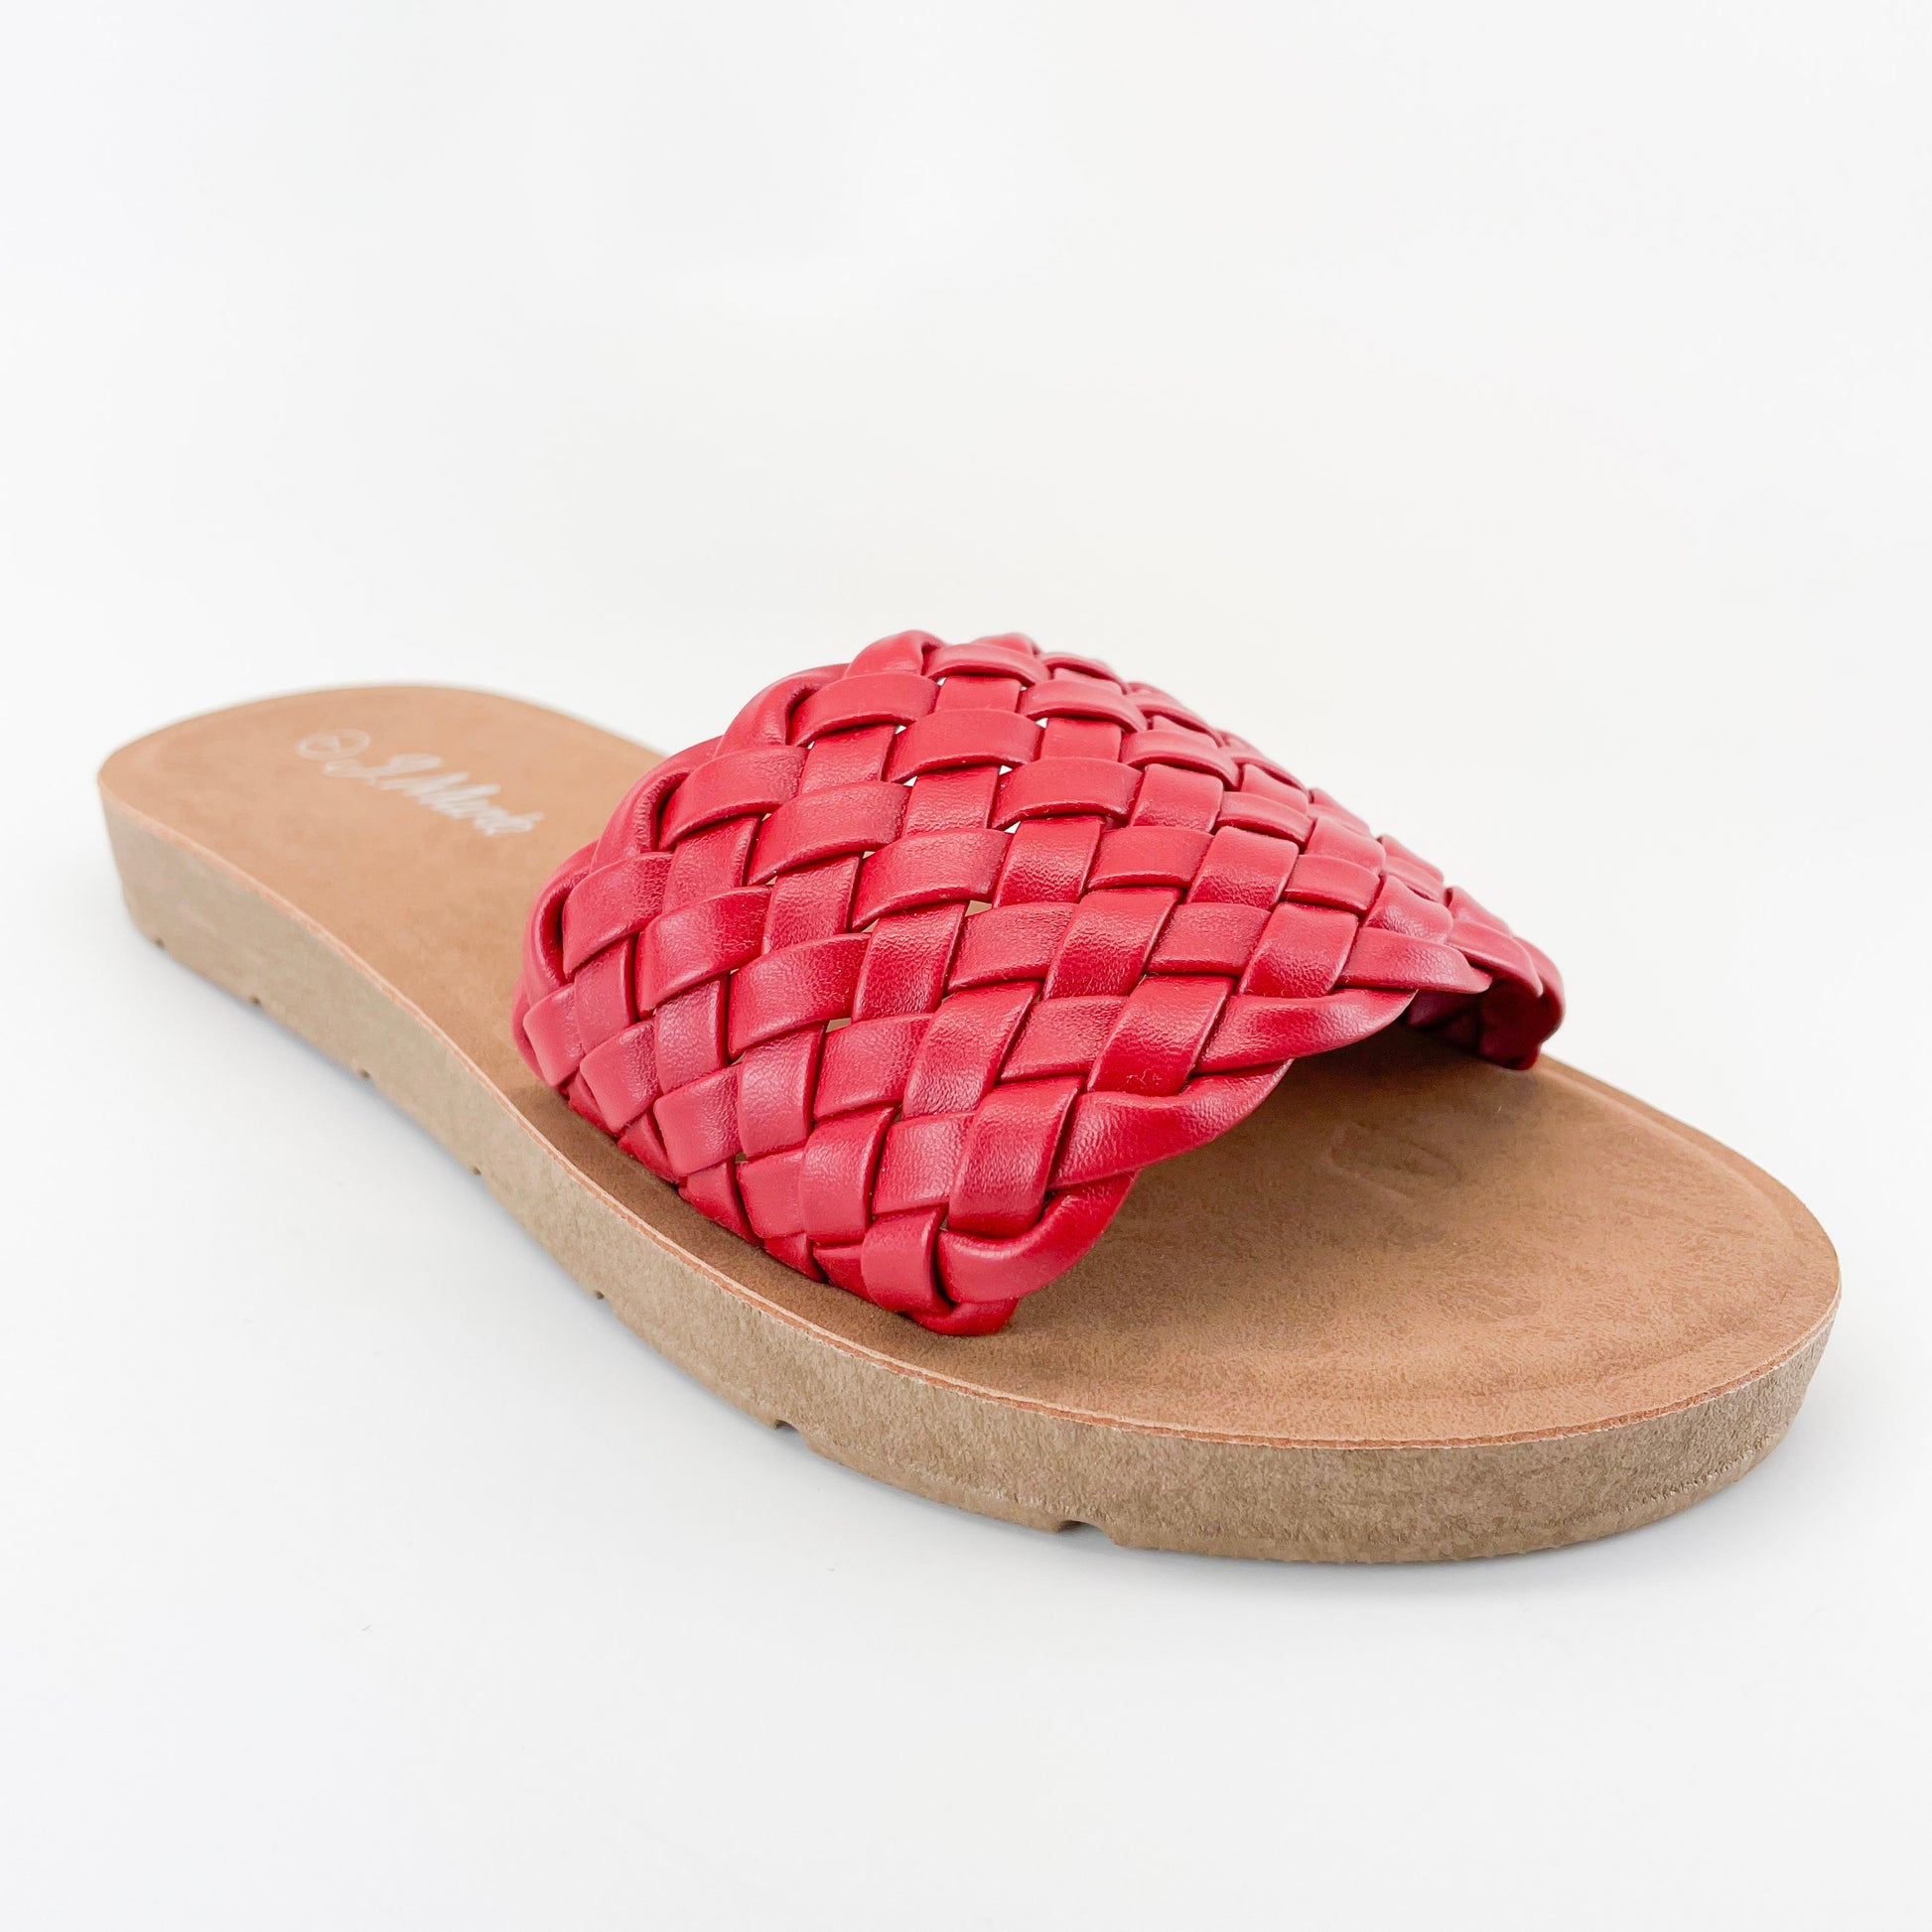 j. mark form-205 red braided woven sandals braided strap sandals flat chunky braided sandals